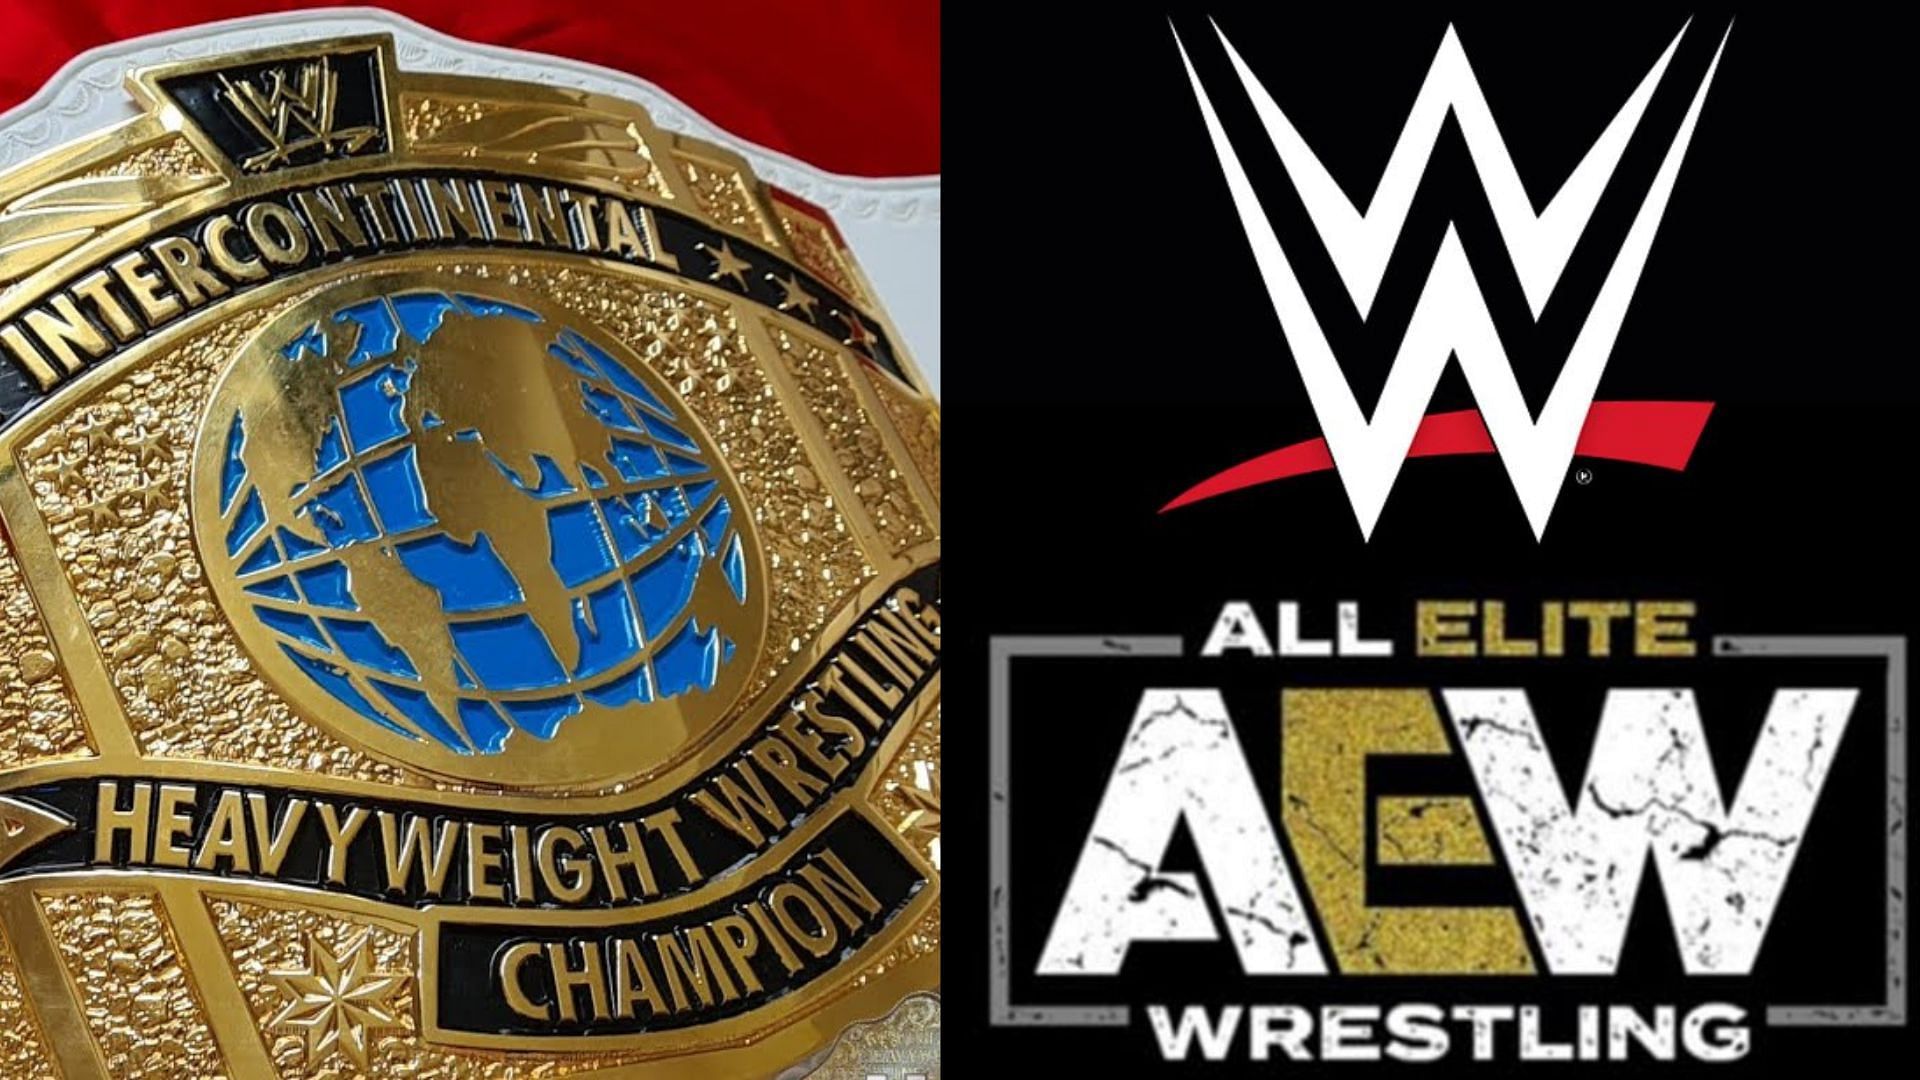 The Intercontinental title is the second-oldest active championship in the WWE